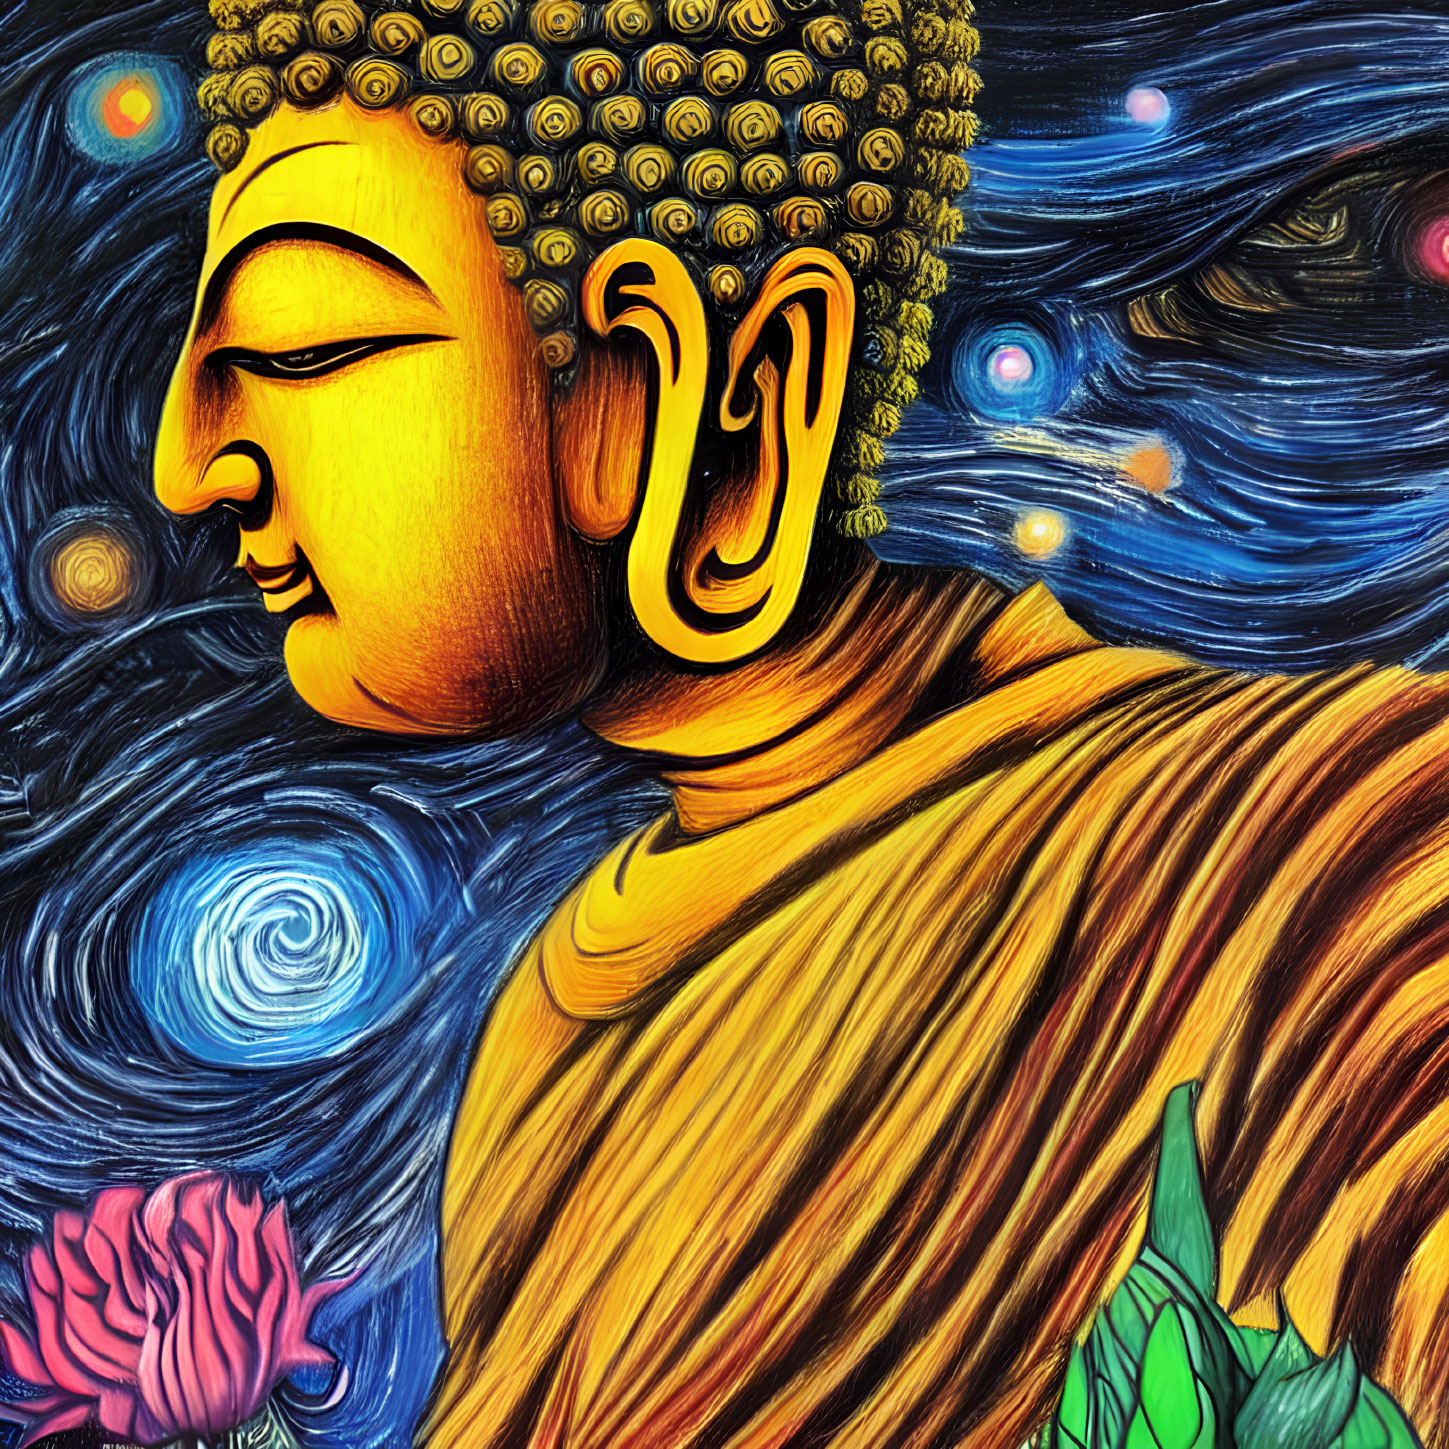 Serene Buddha painting in golden face and orange robes, holding pink lotus